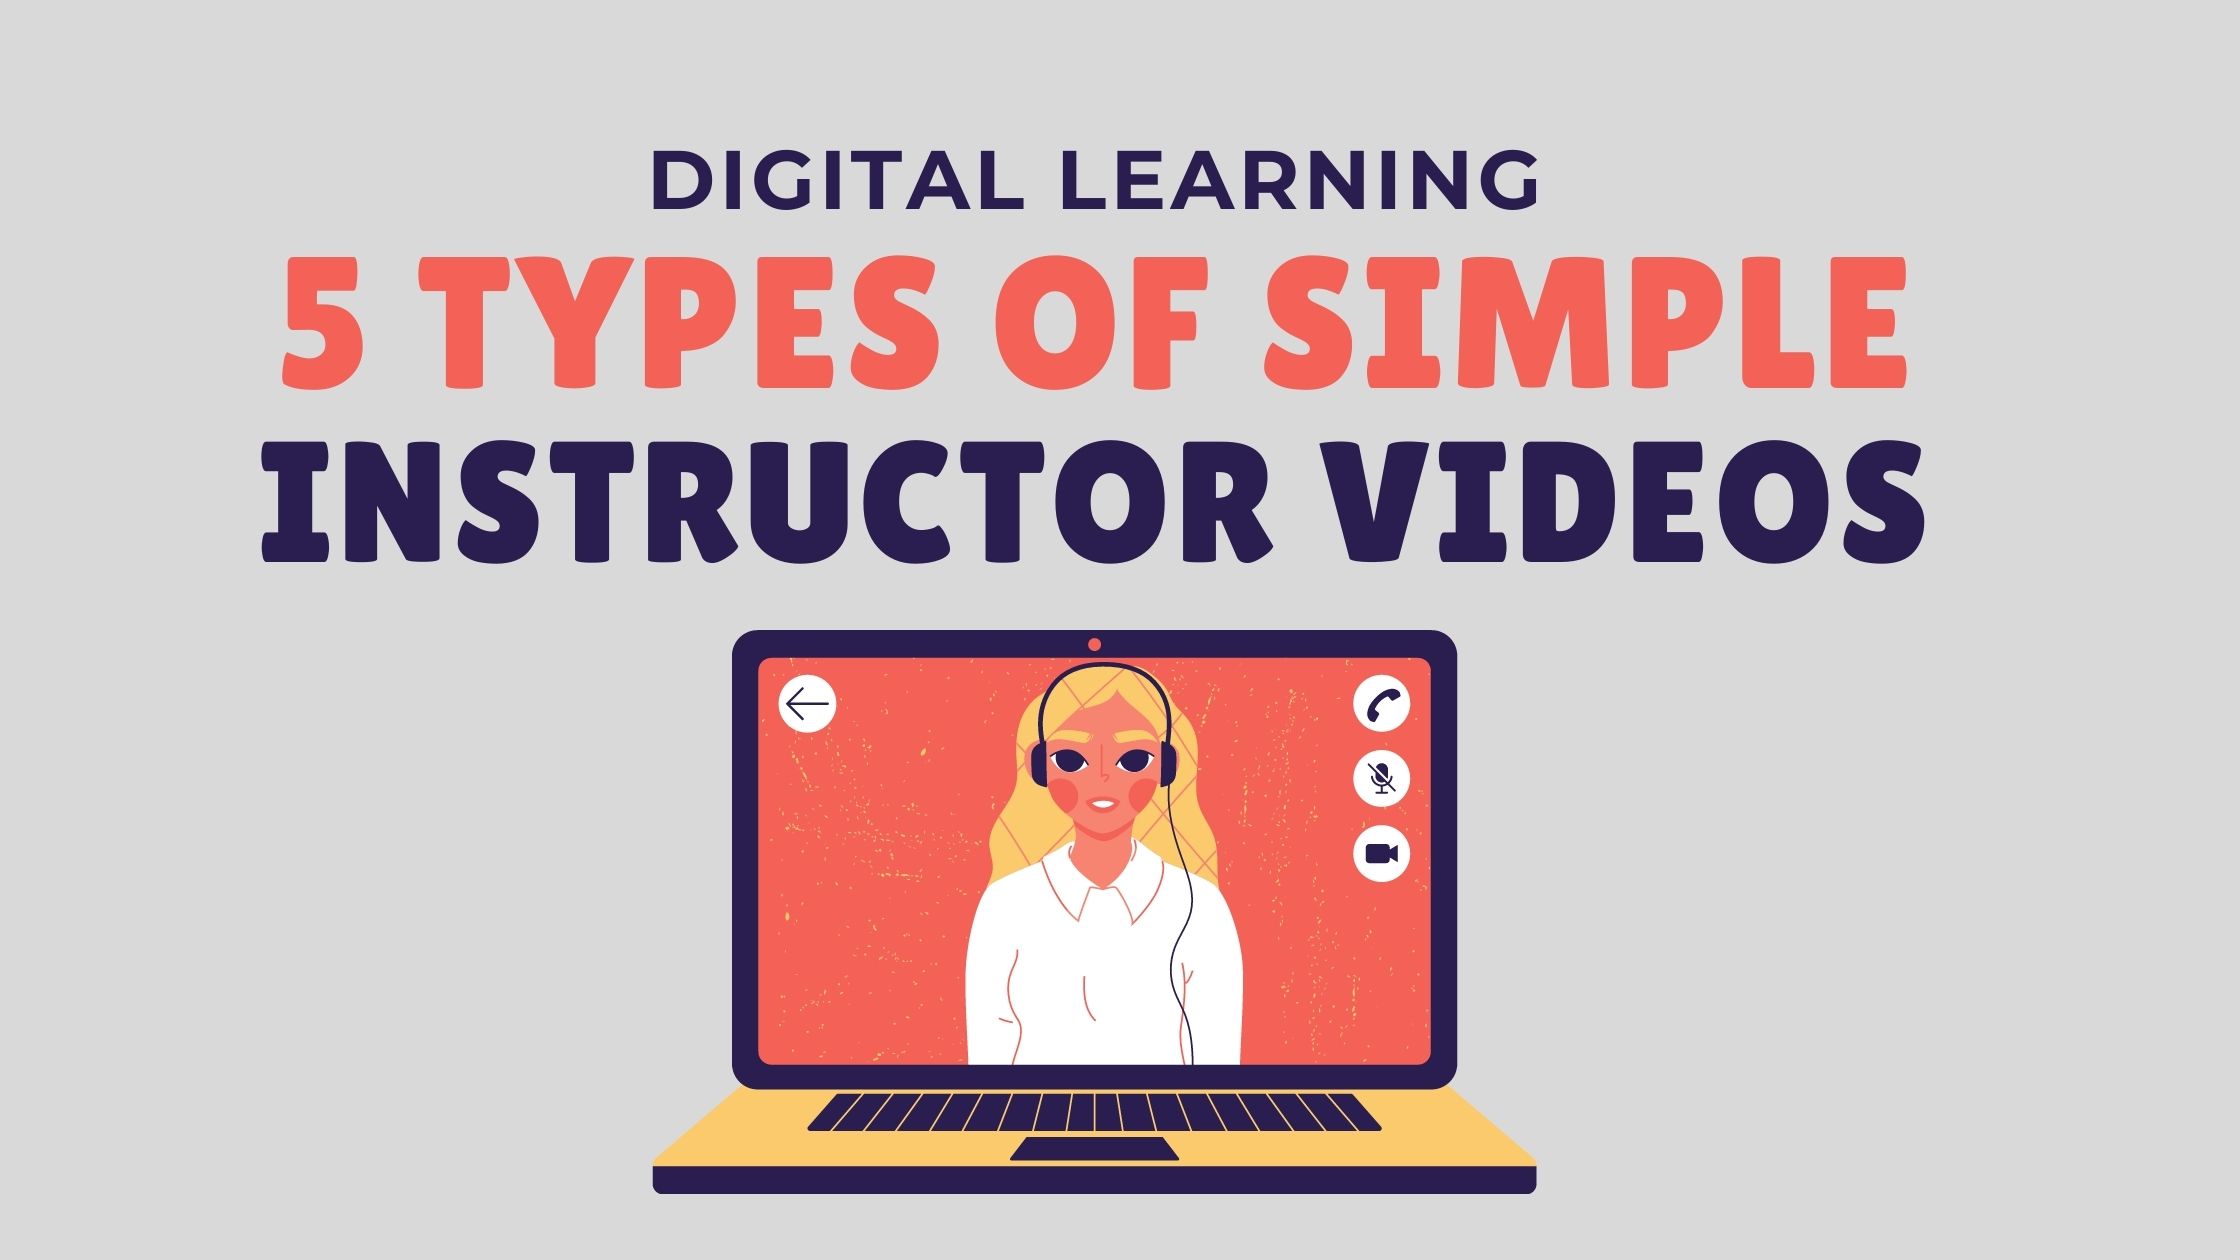 5 Types of Simple Instructor Videos